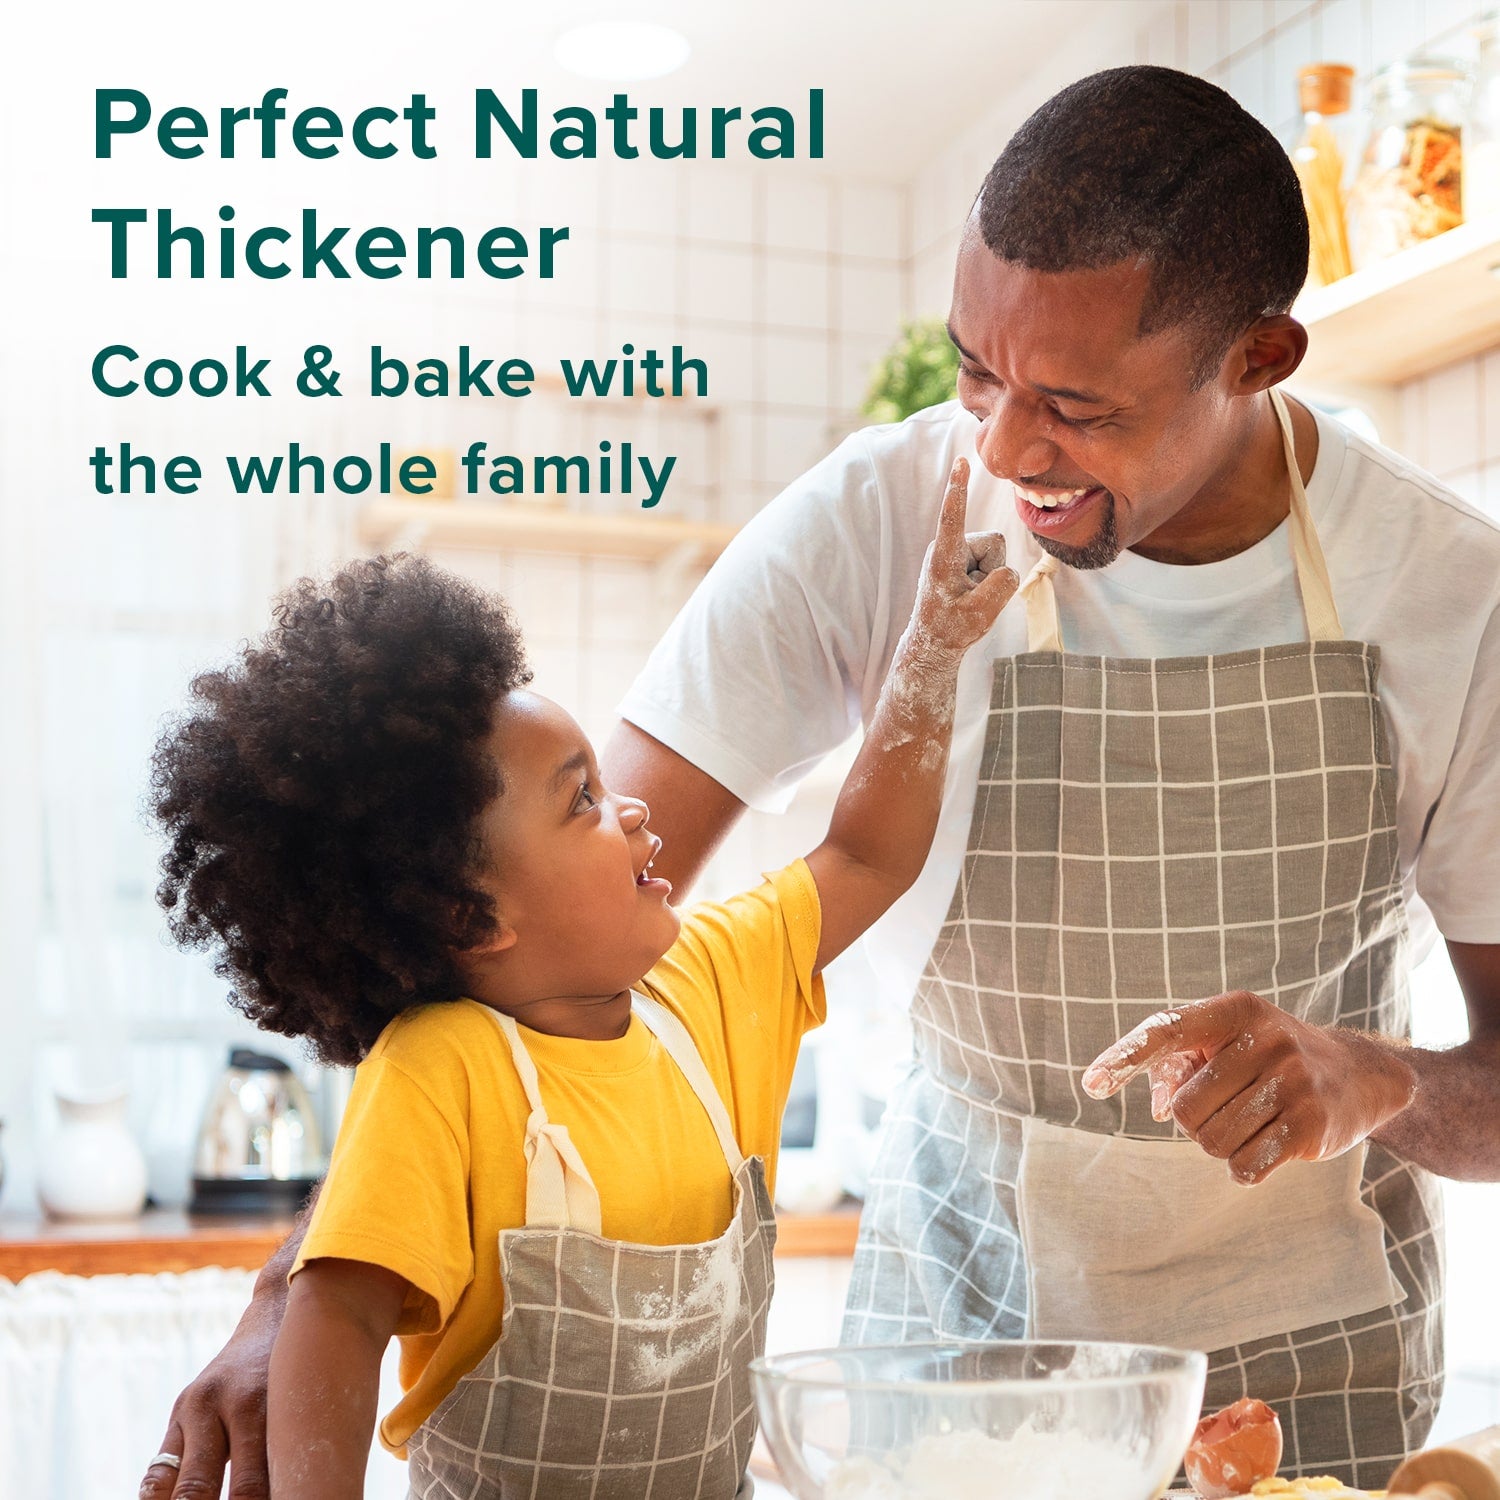 Further Food Gelatin - Perfect Natural Thickener. Cook & bake with the whole family